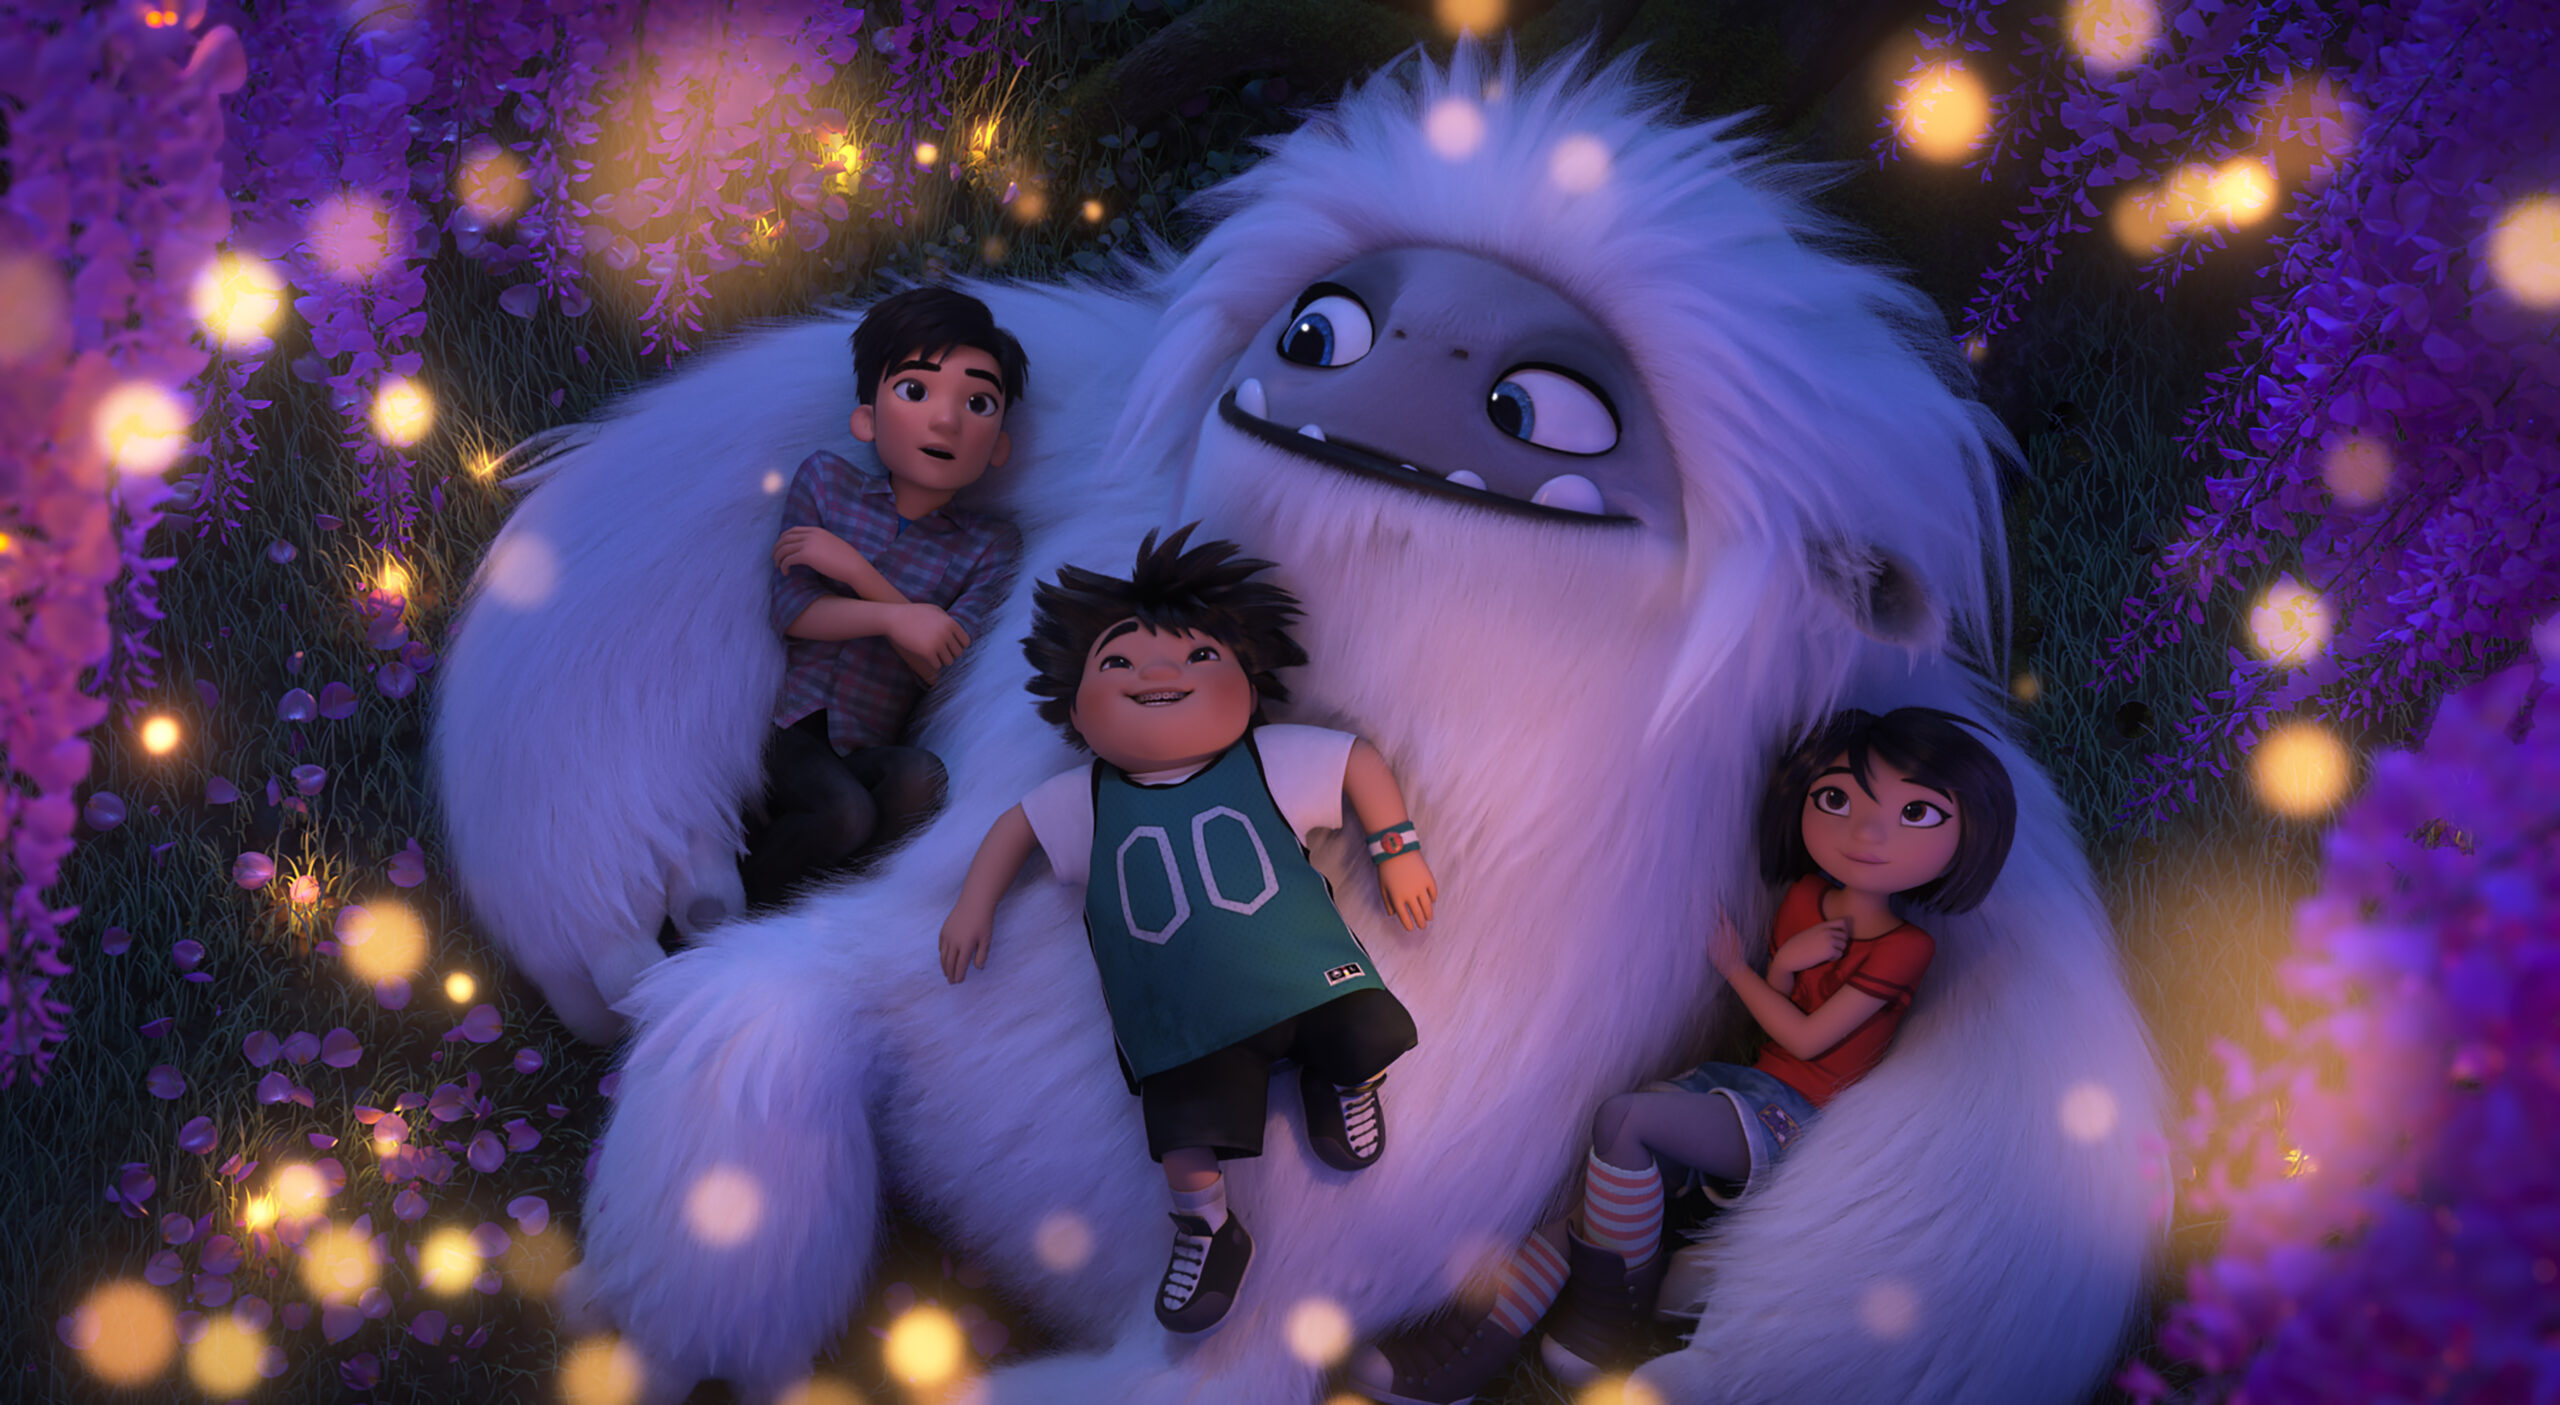 From left, Jin (Tenzing Norgay Trainor), Peng (Albert Tsai) and Yi (Chloe Bennet) enjoy a peaceful moment beneath a flowering tree with Everest the Yeti in DreamWorks Animation and Pearl Studio’s "Abominable," written and directed by Jill Culton.